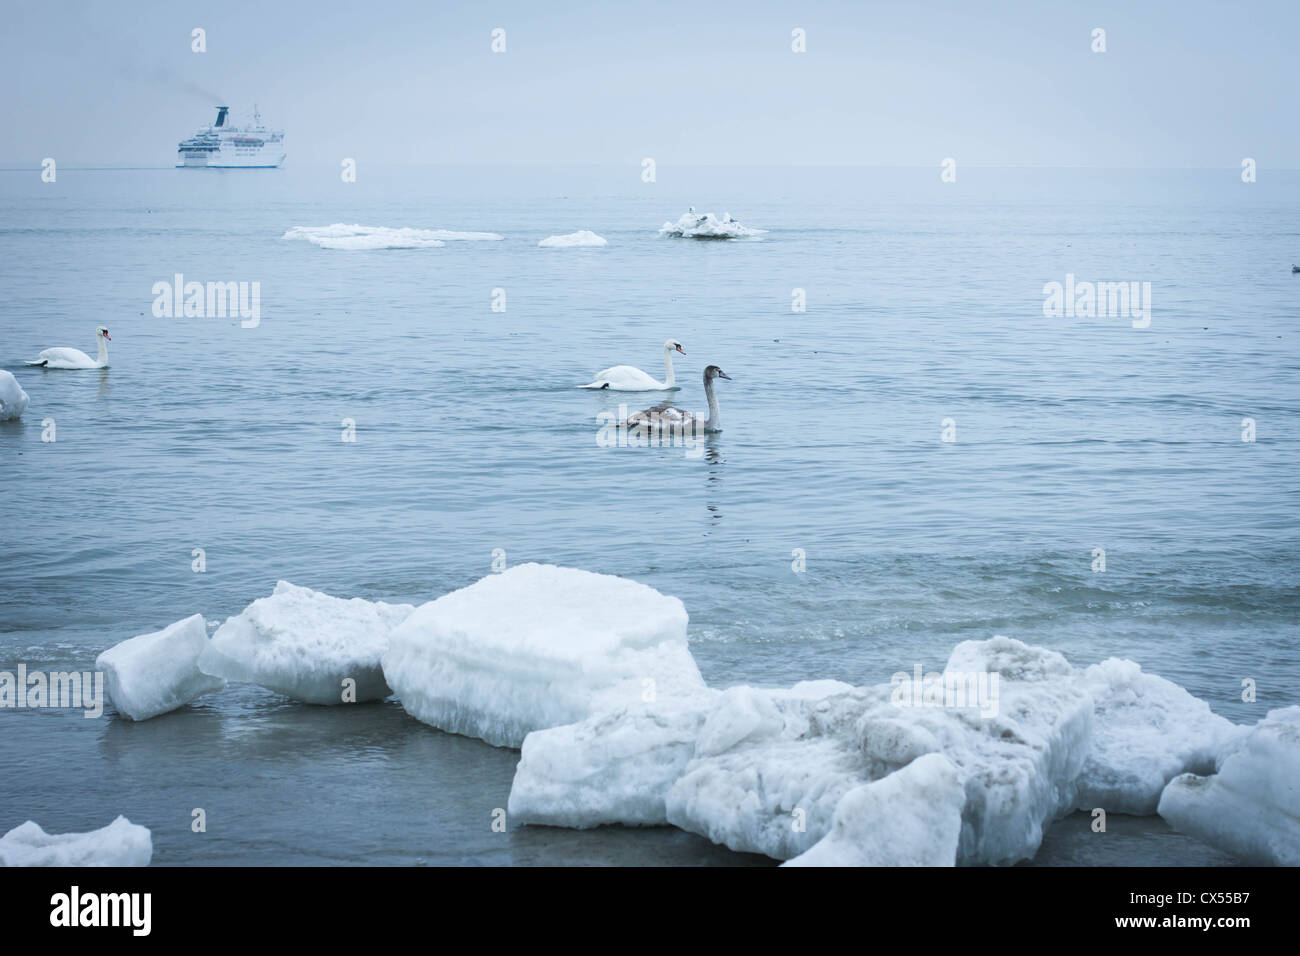 Swans in winter sea with ship Stock Photo